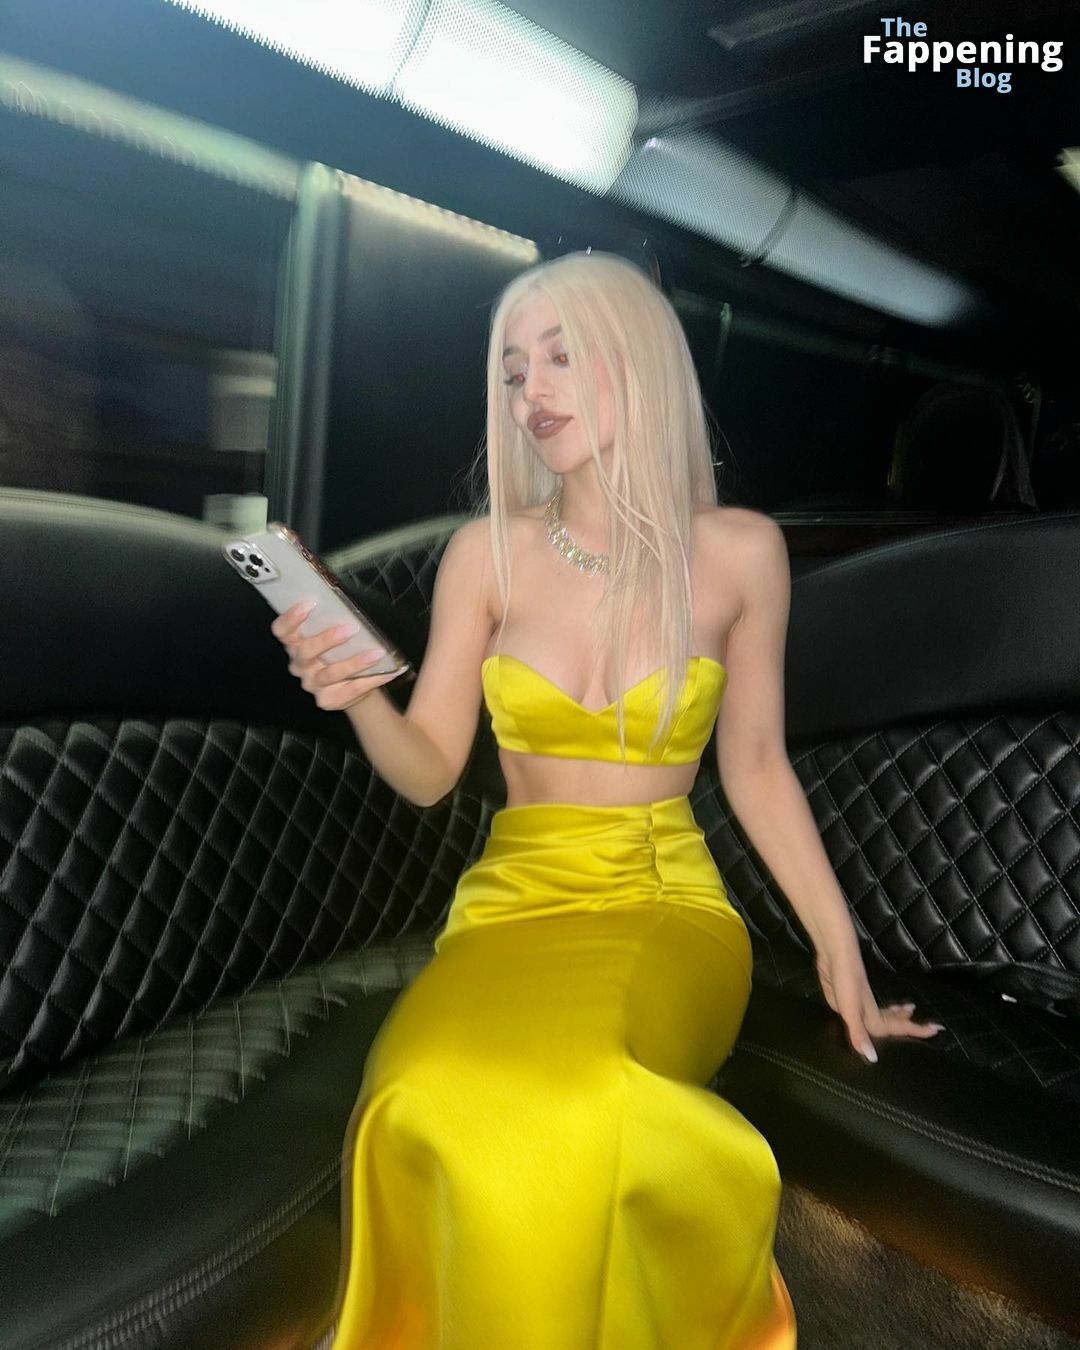 Ava-Max-Yellow-Outfit-Braless-Cleavage-2-thefappeningblog.com_.jpg